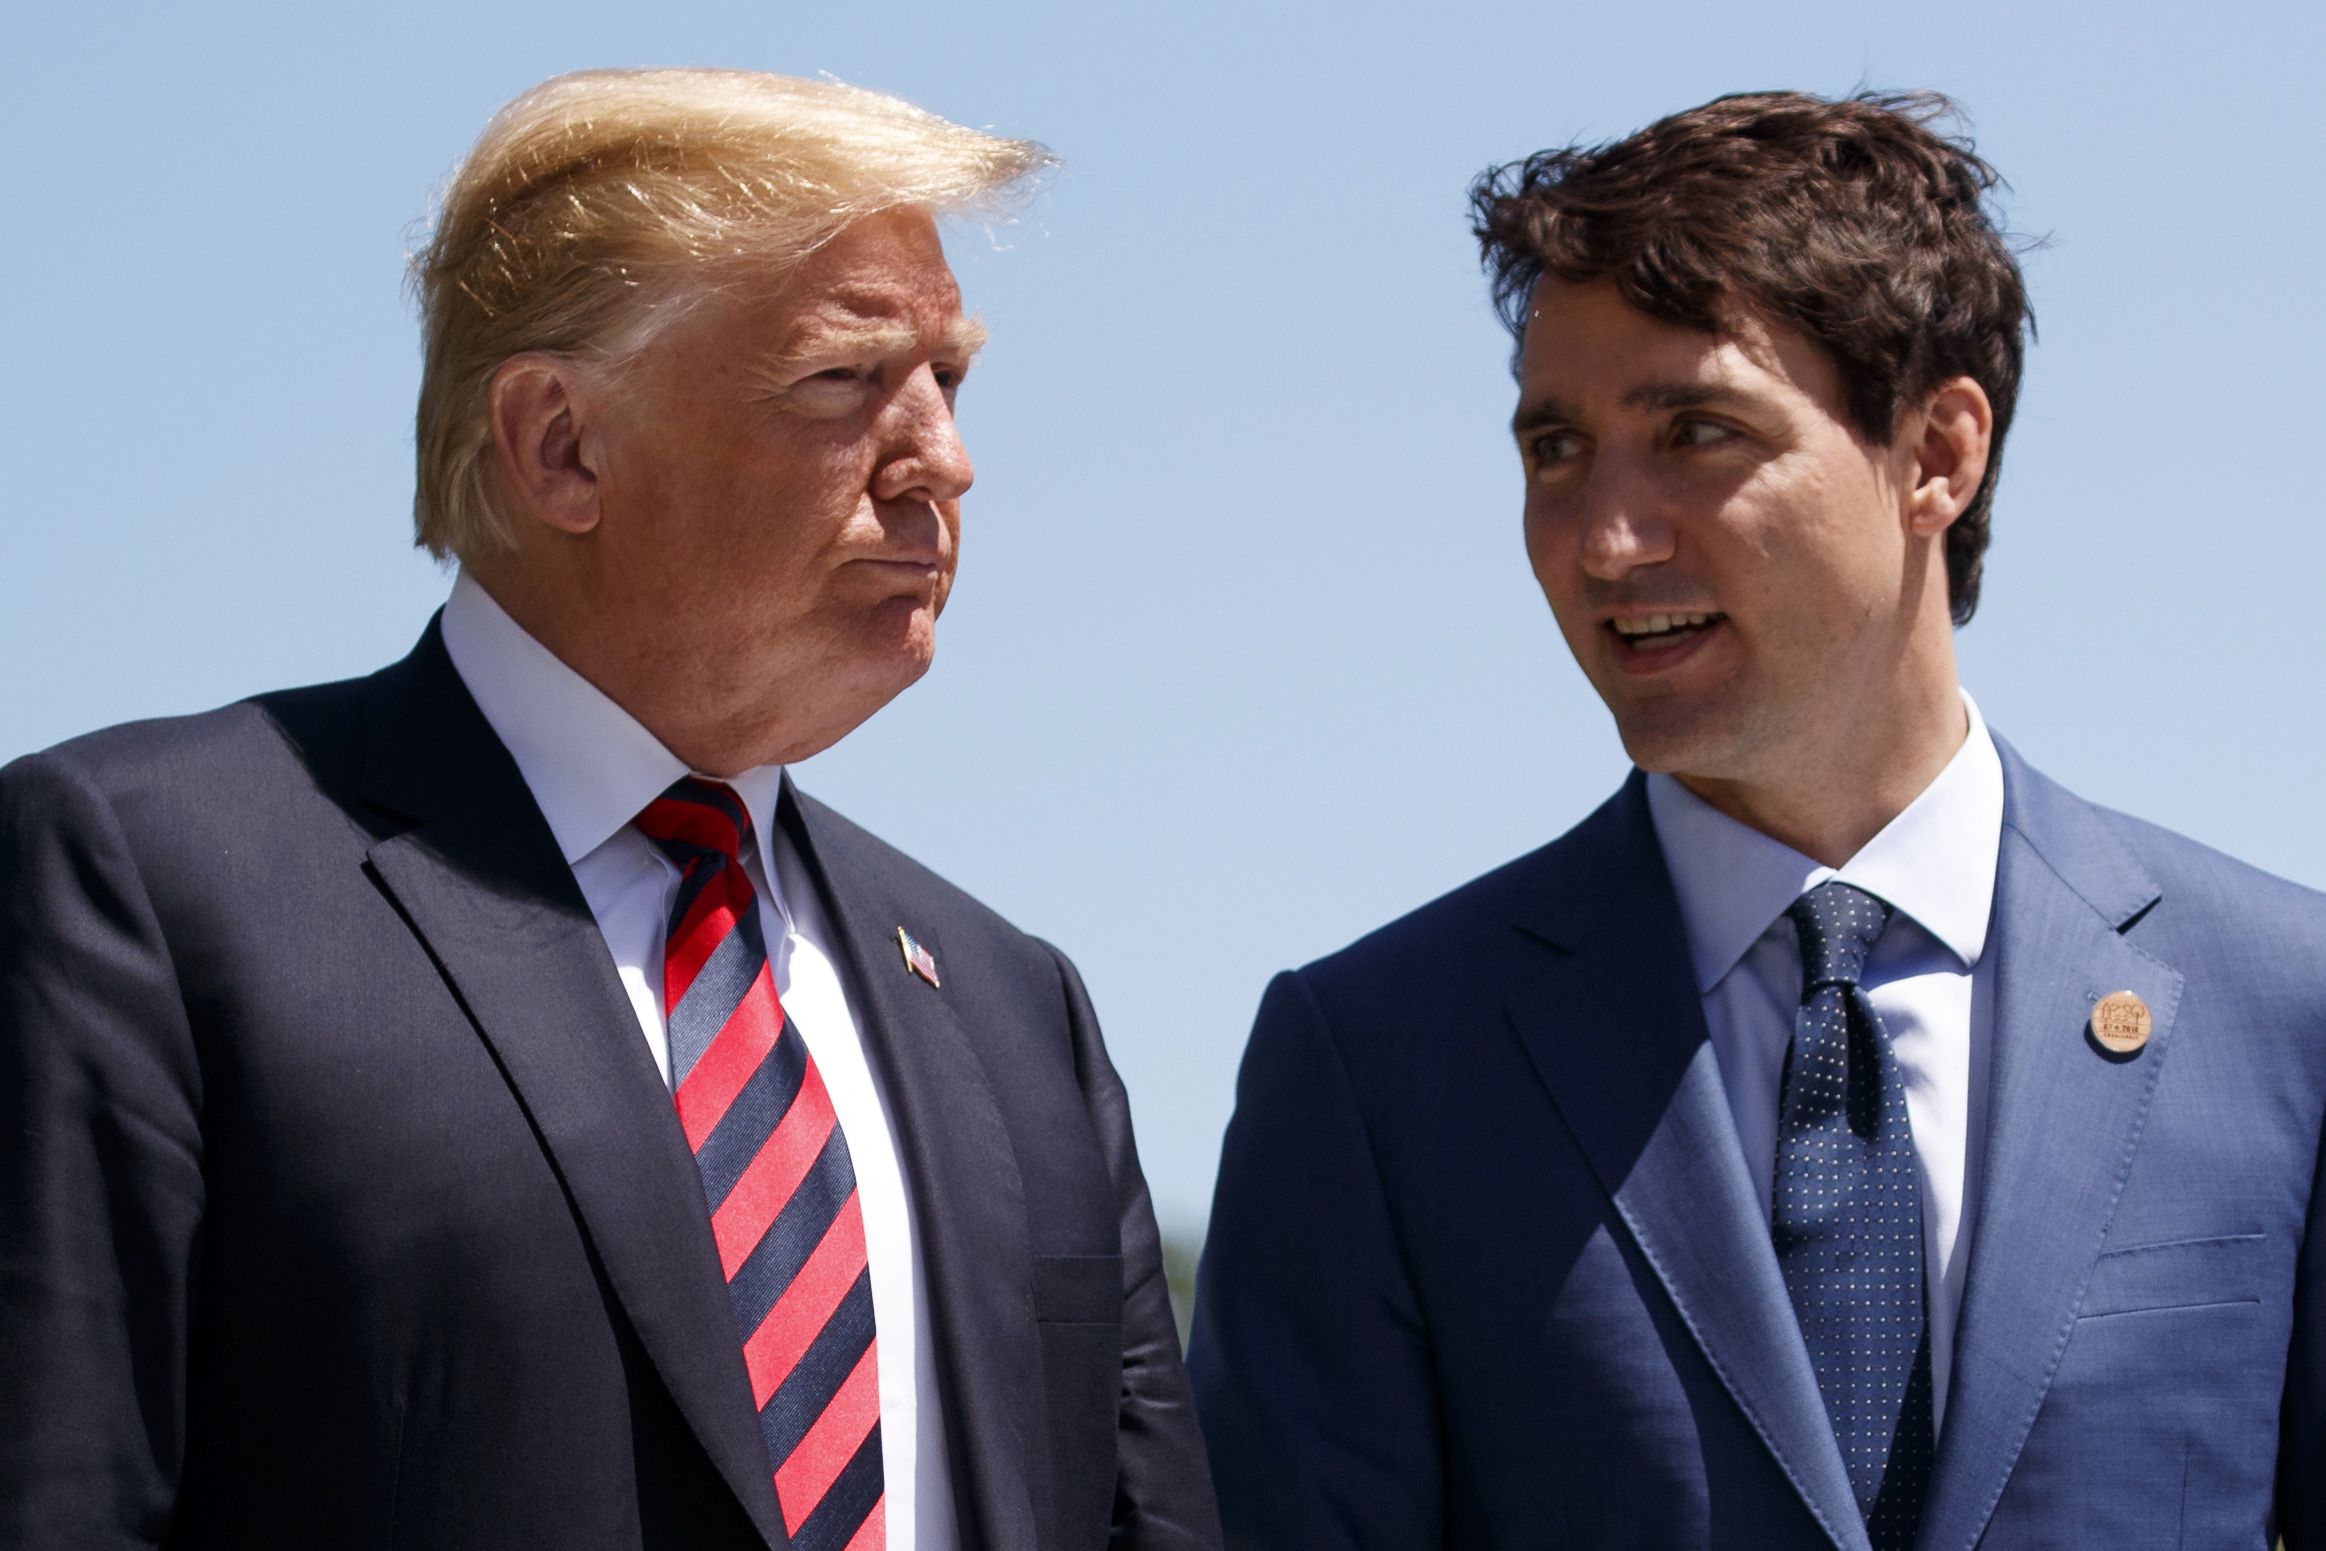 PHOTO: President Donald Trump talks with Canadian Prime Minister Justin Trudeau during a G-7 Summit welcome ceremony in Charlevoix, Canada, June 8, 2018.